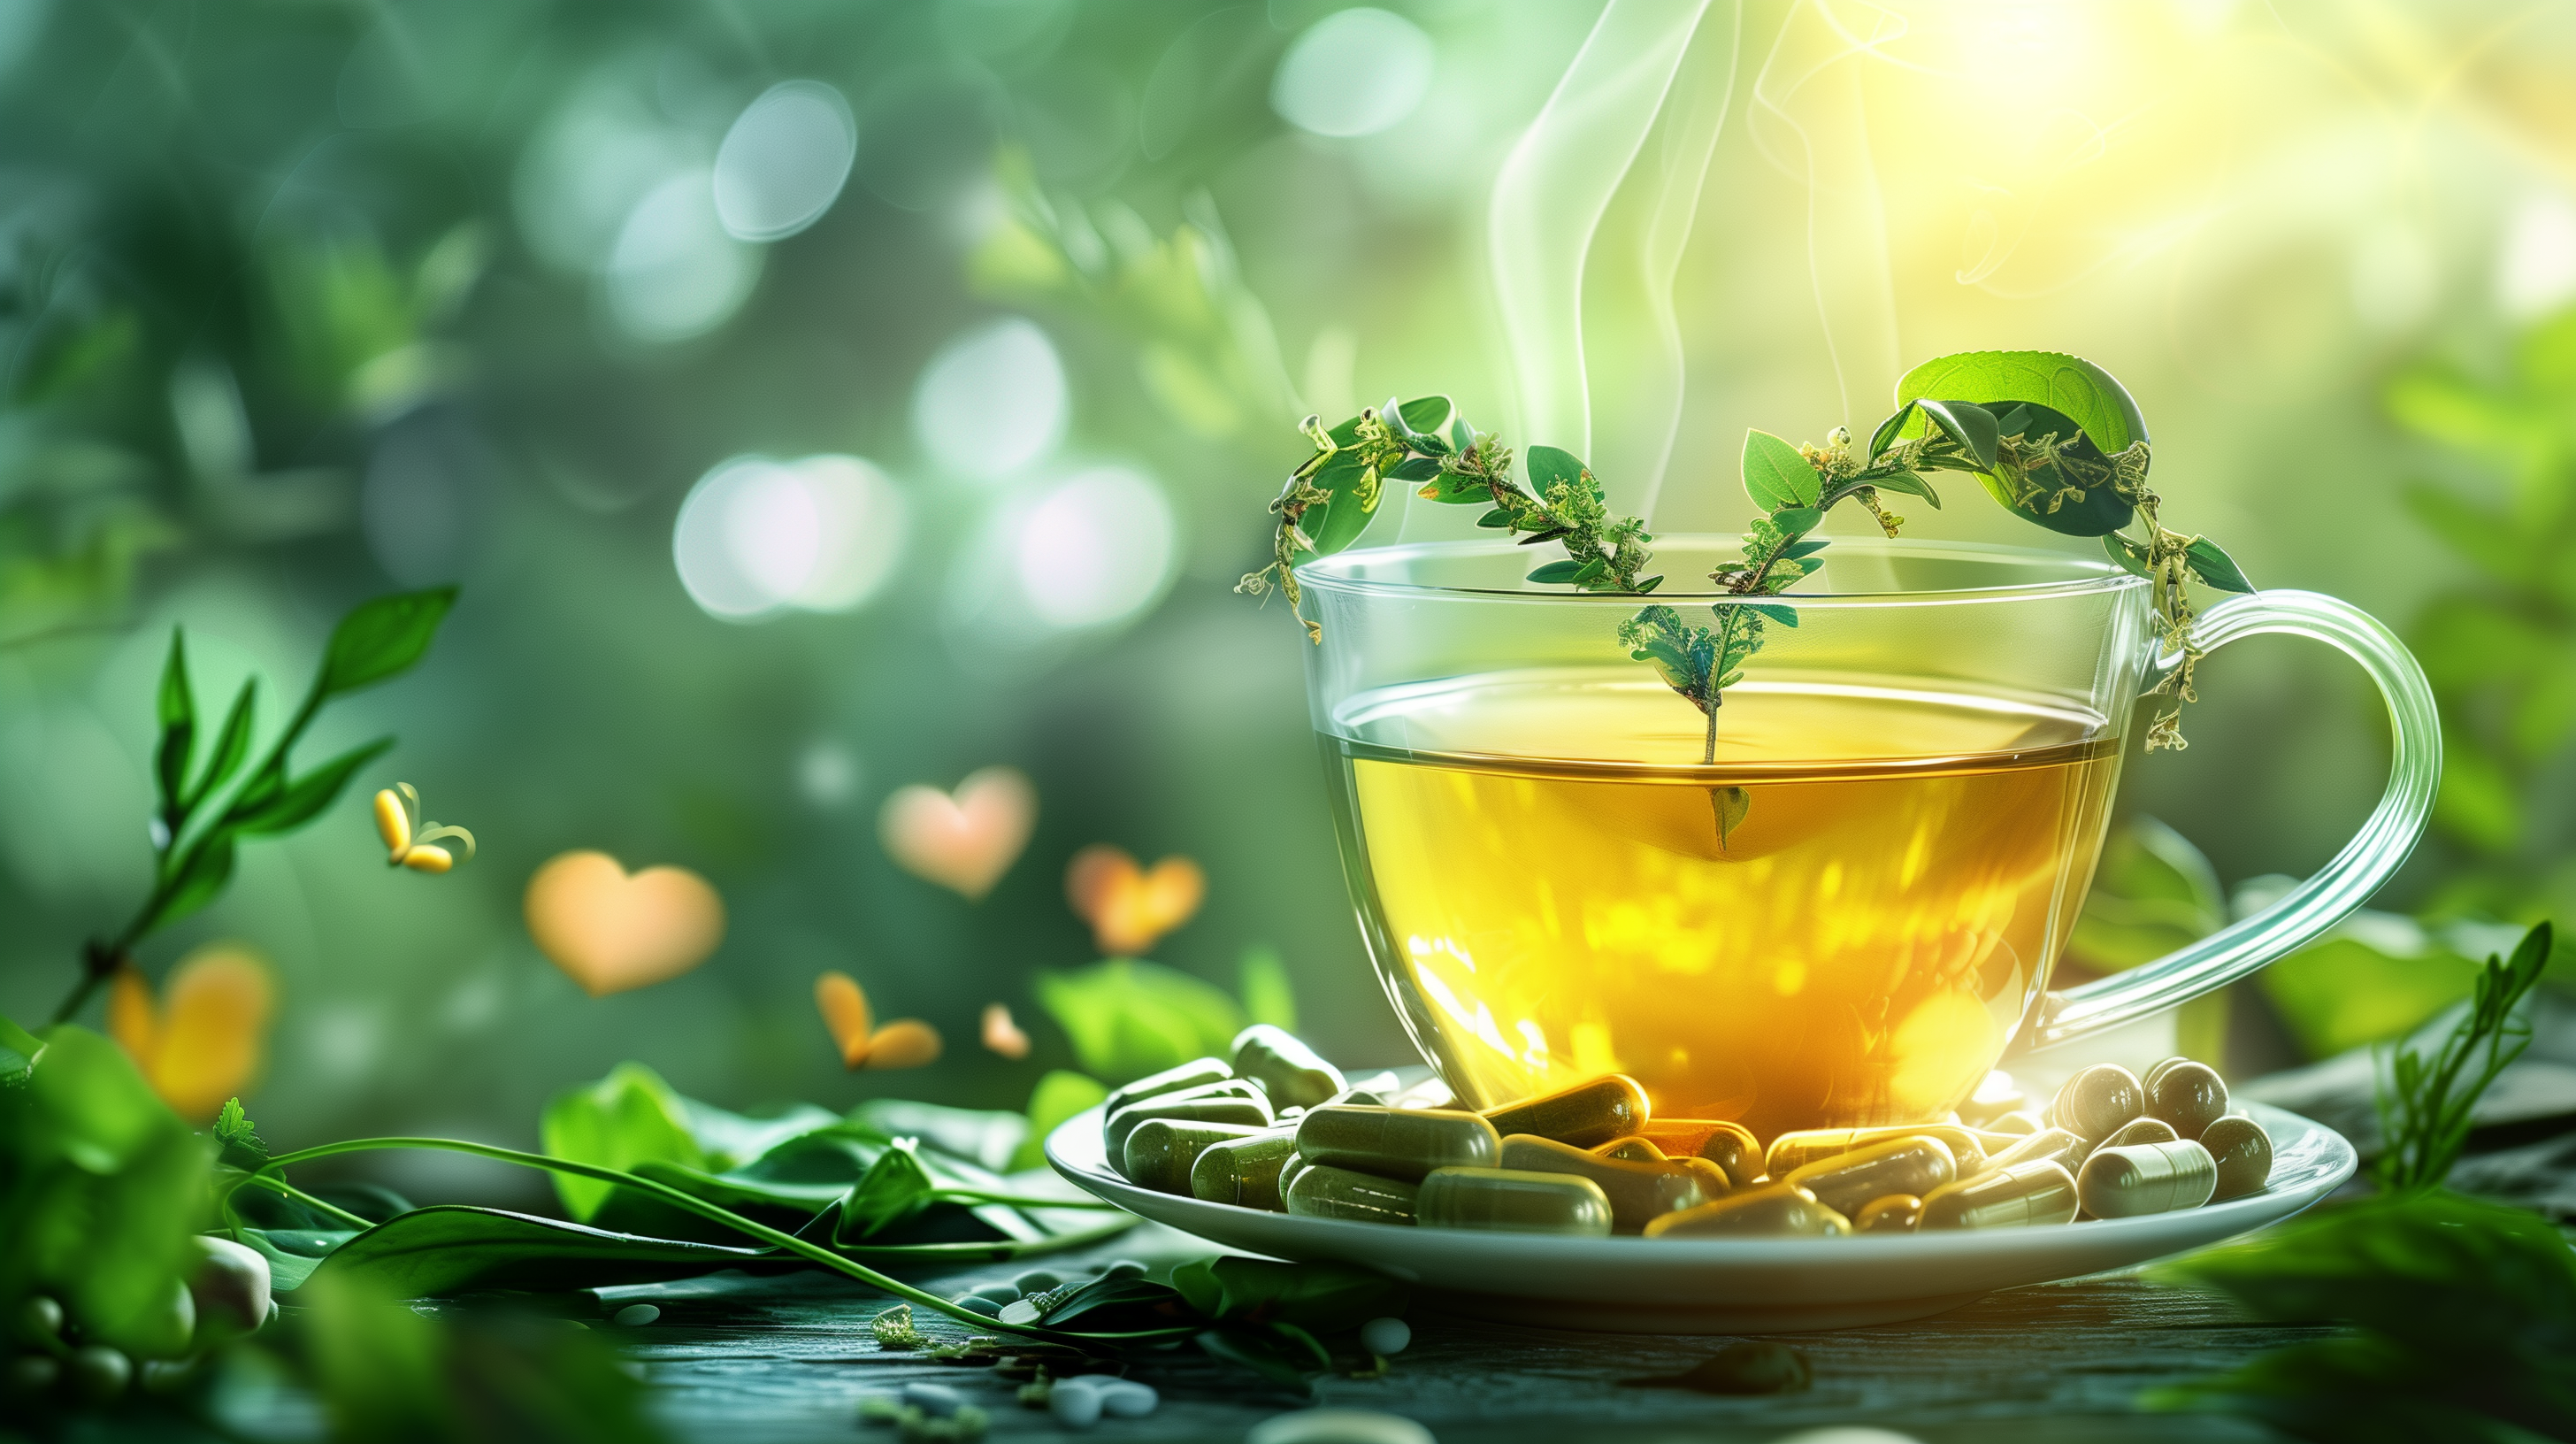 steaming cup of green tea, surrounded by fresh green tea leaves